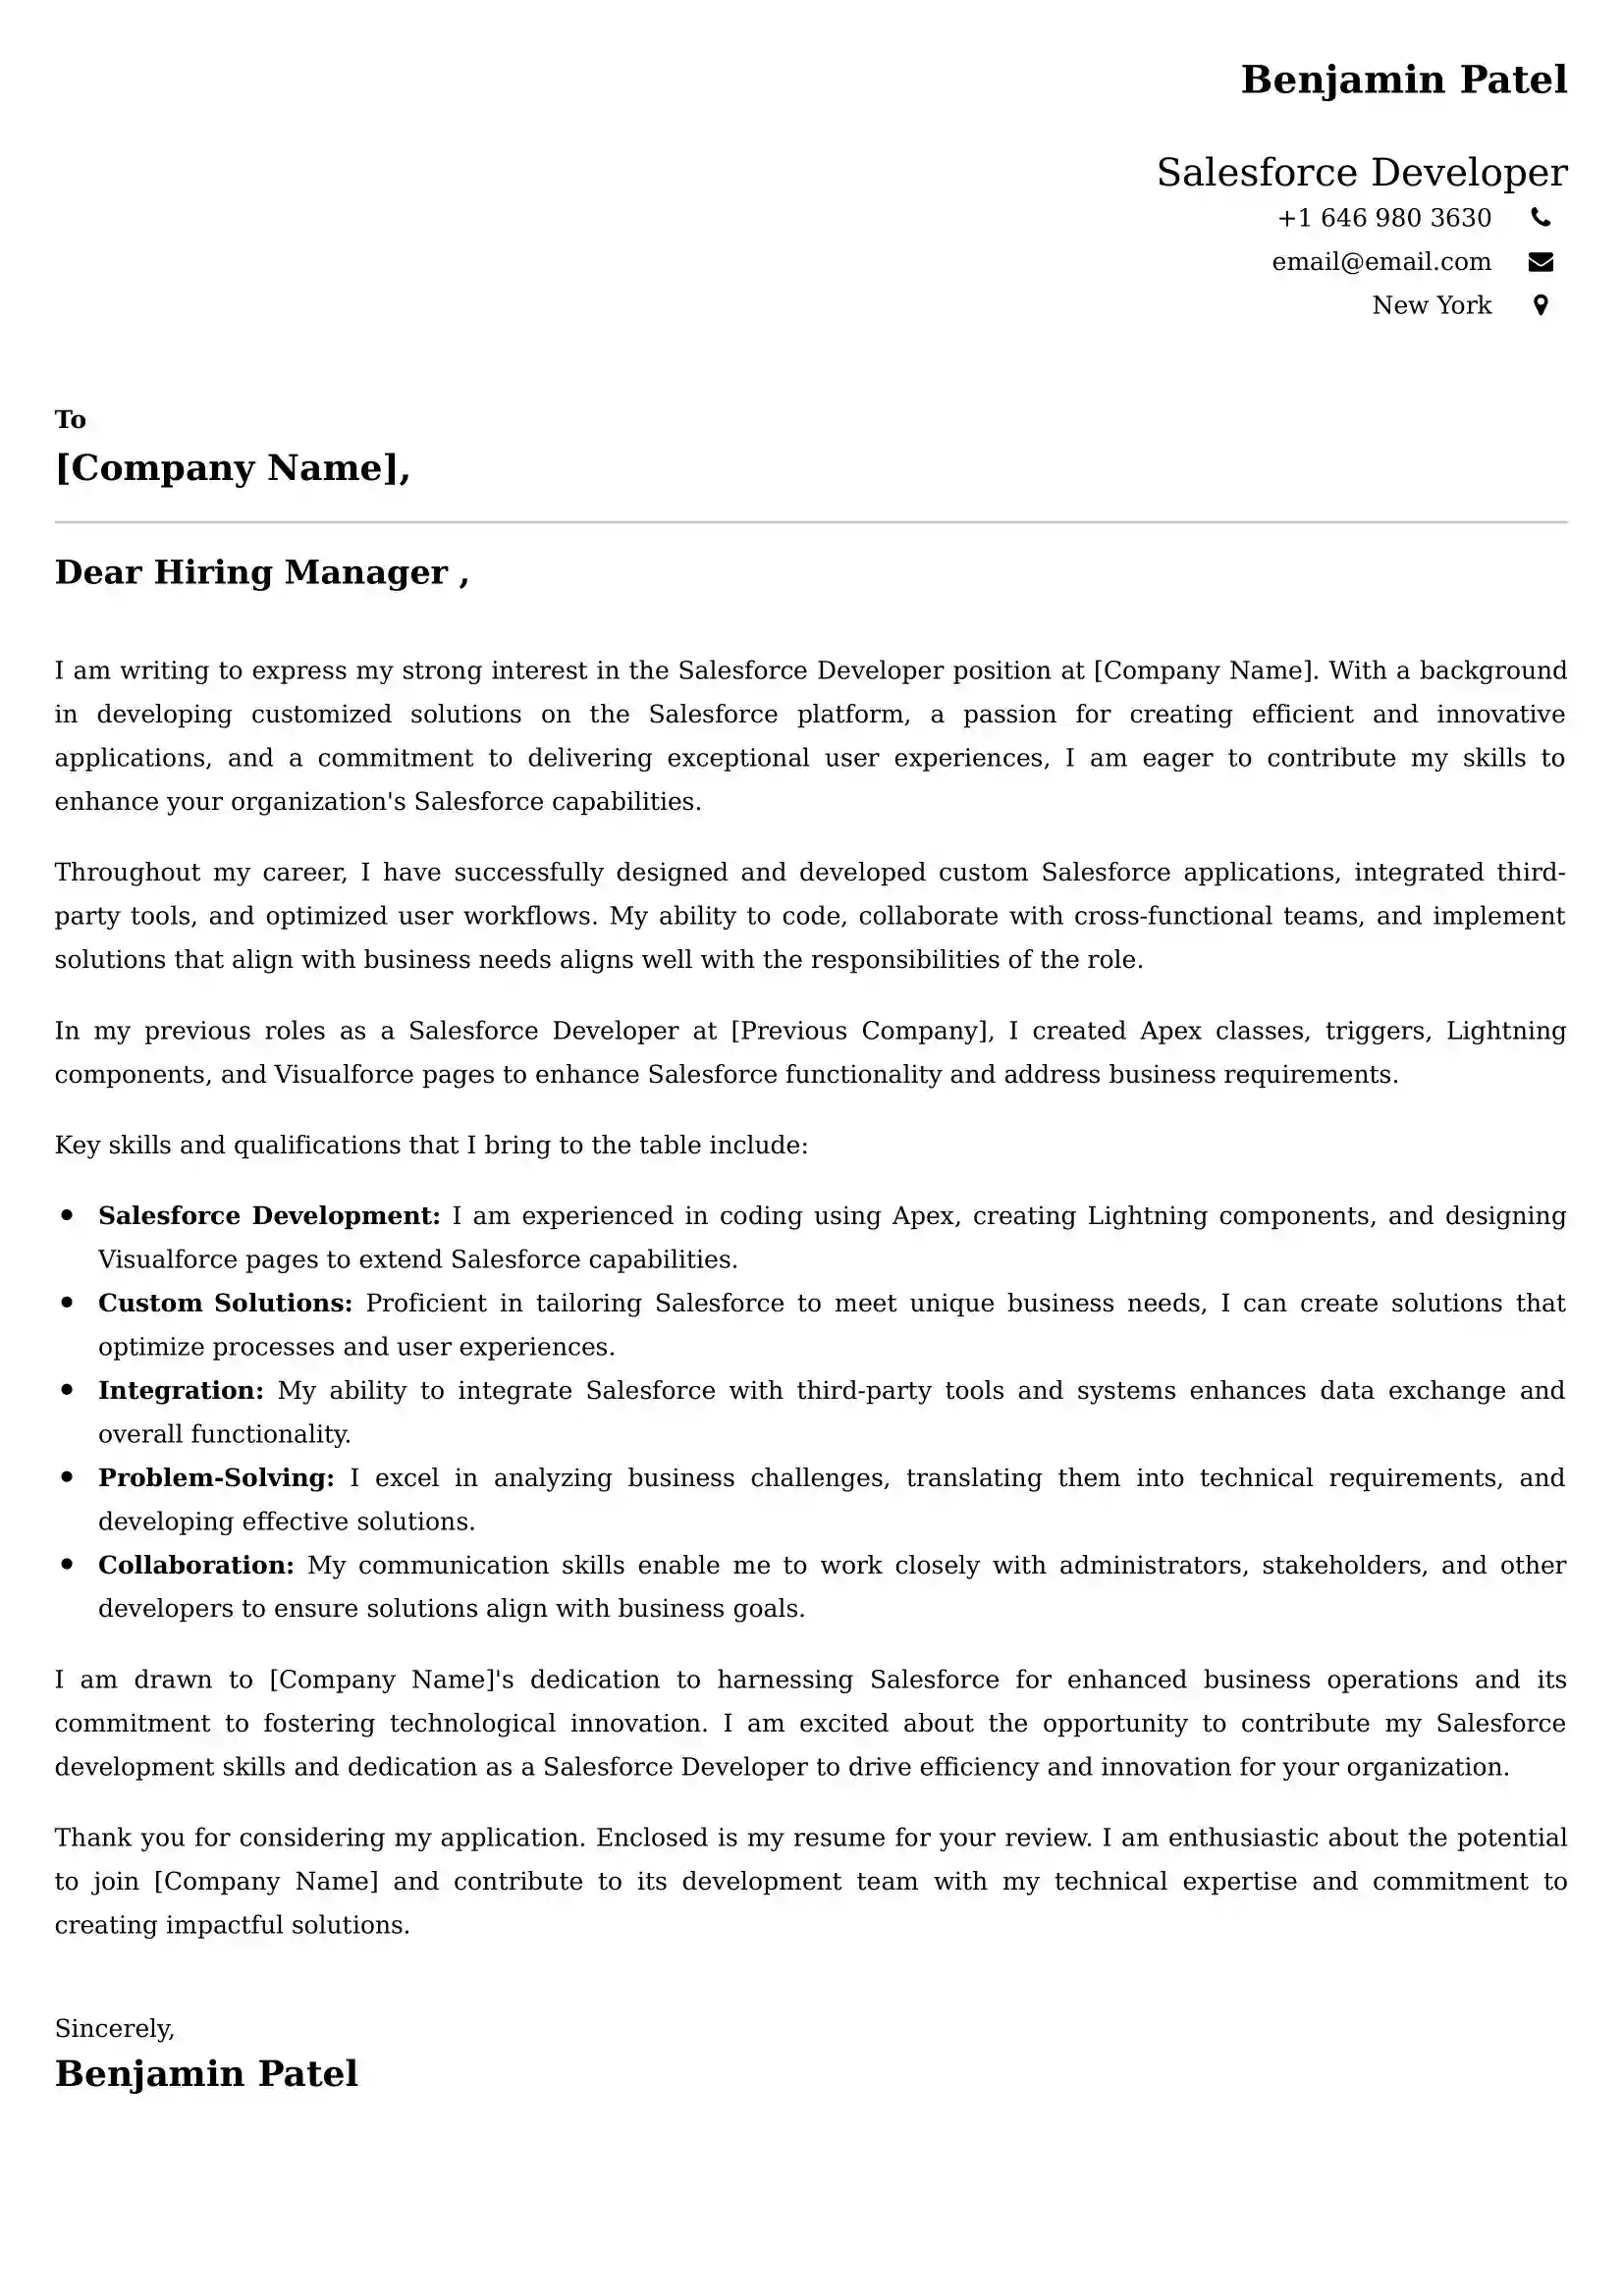 Salesforce Developer Cover Letter Examples UK - Tips and Guide